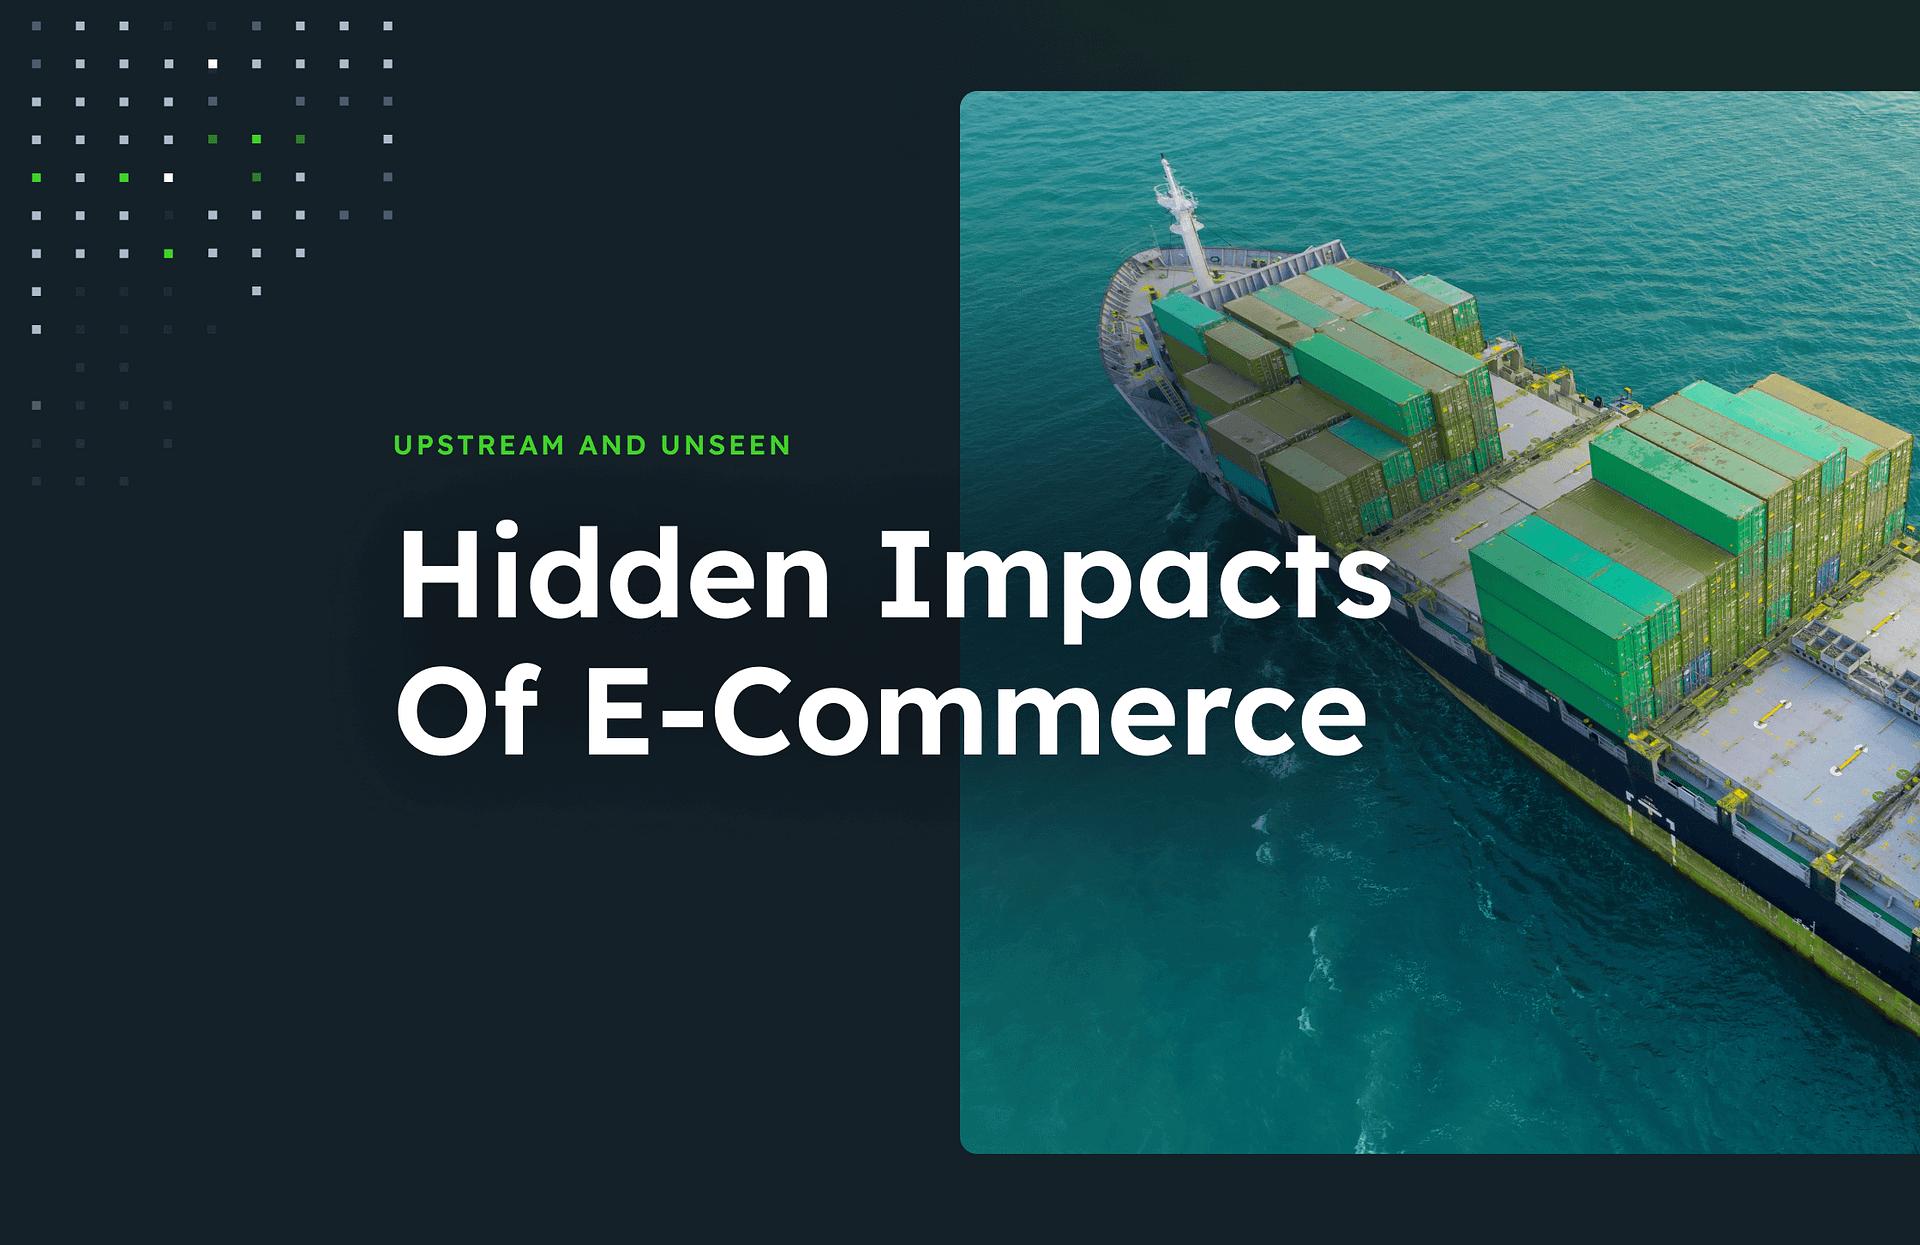 Hidden impacts of e-commerce text on a photo of a freight ship